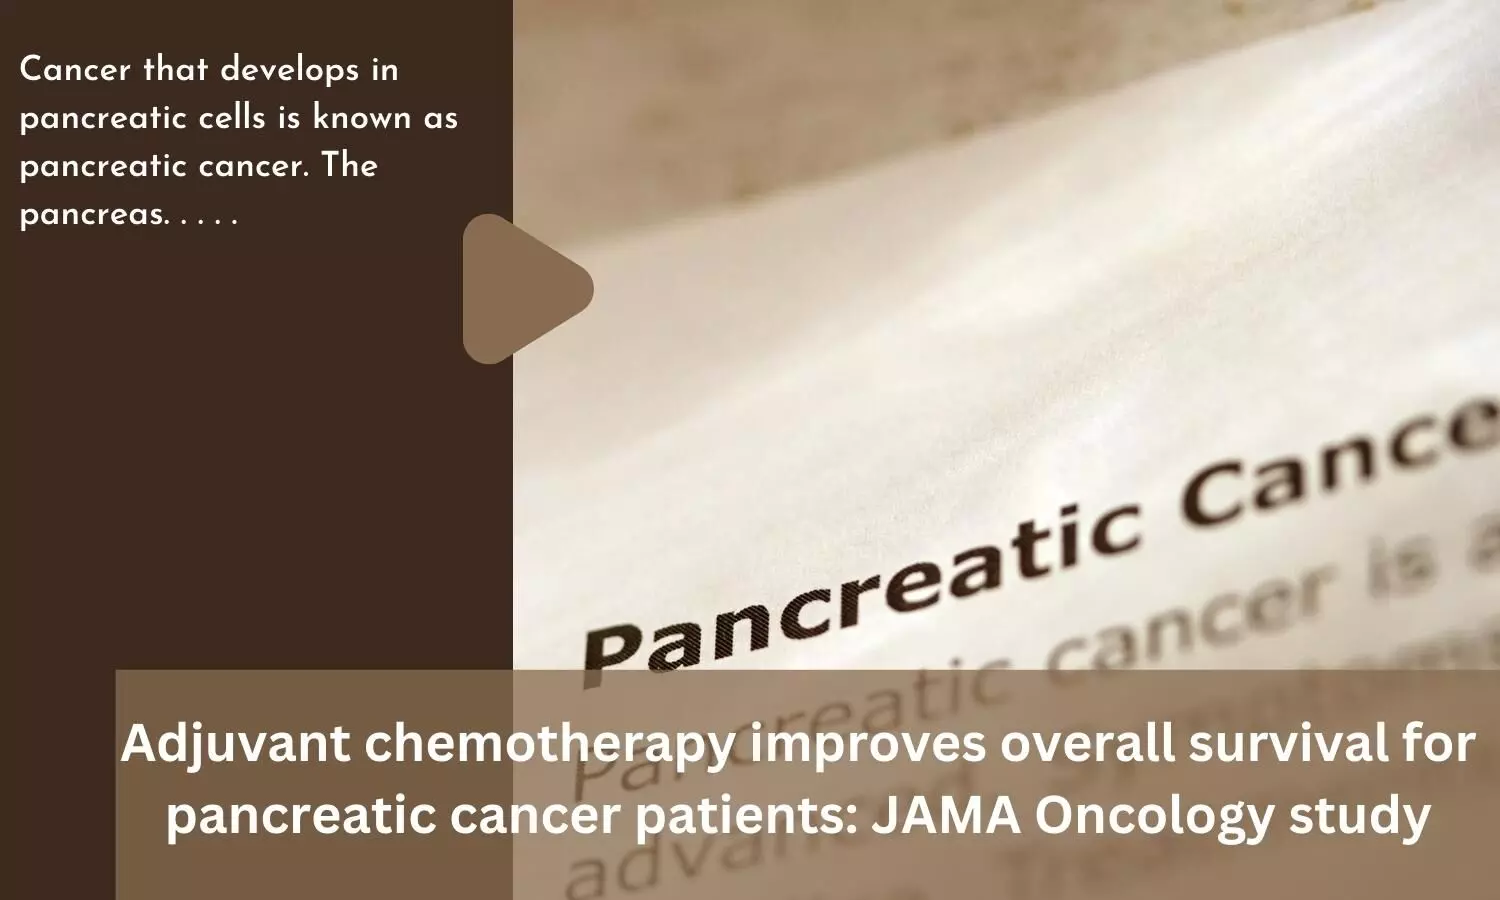 Adjuvant chemotherapy improves overall survival for pancreatic cancer patients: JAMA Oncology study